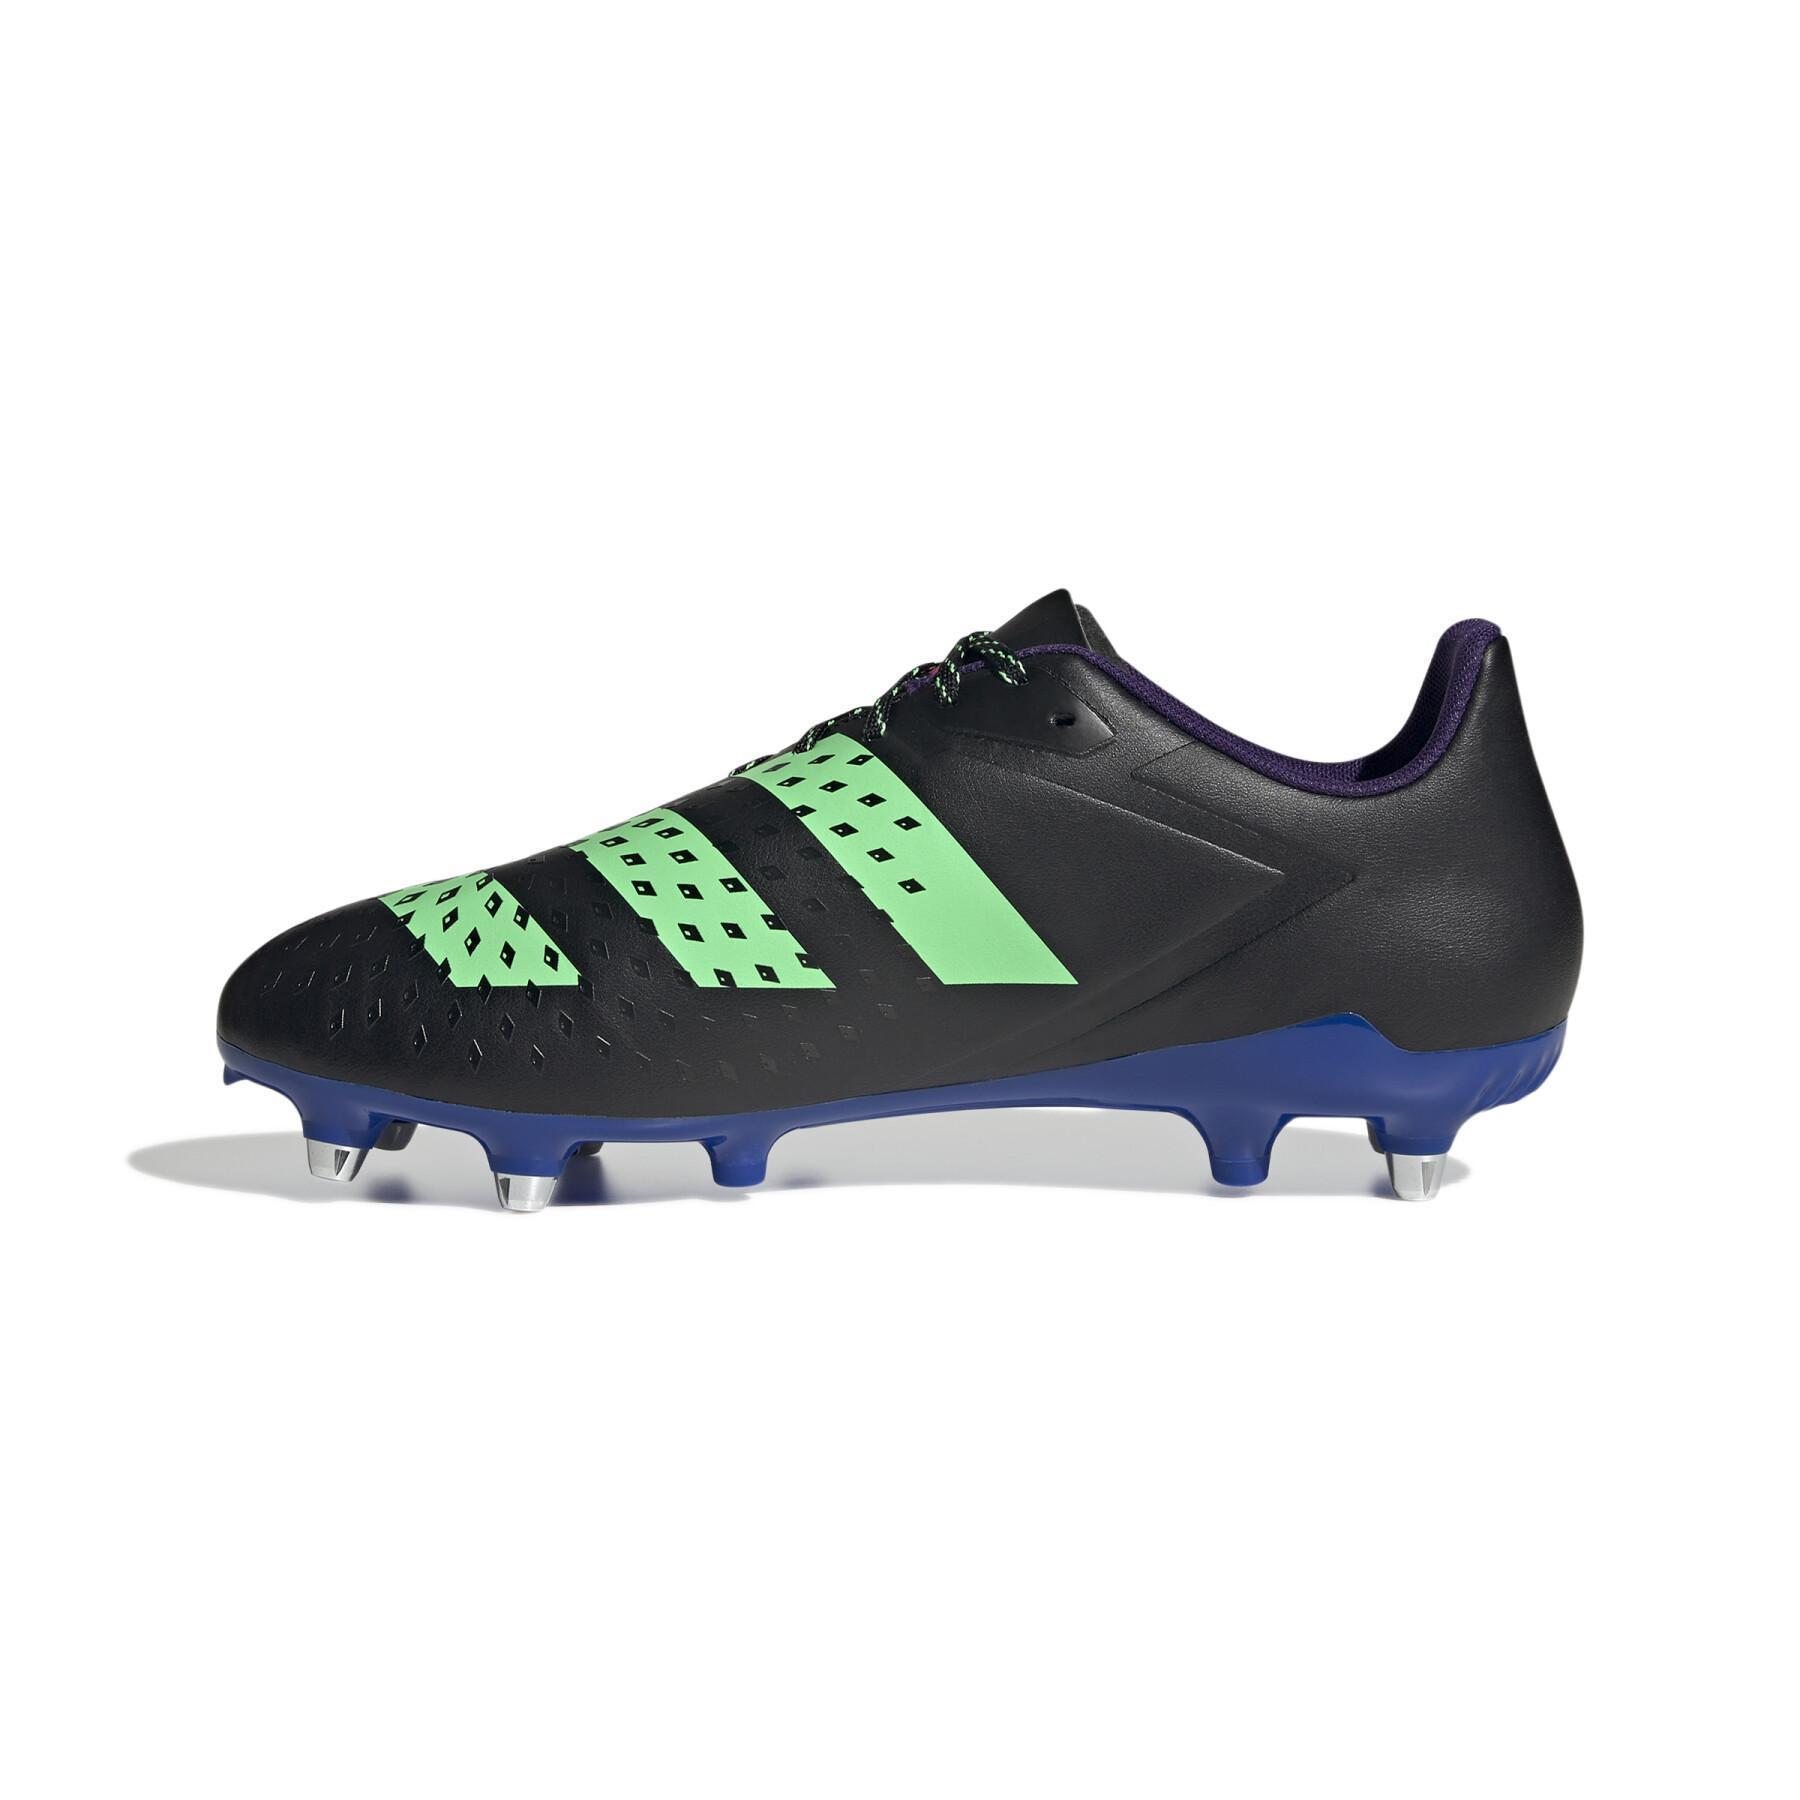 Chaussures de rugby adidas Malice Sg